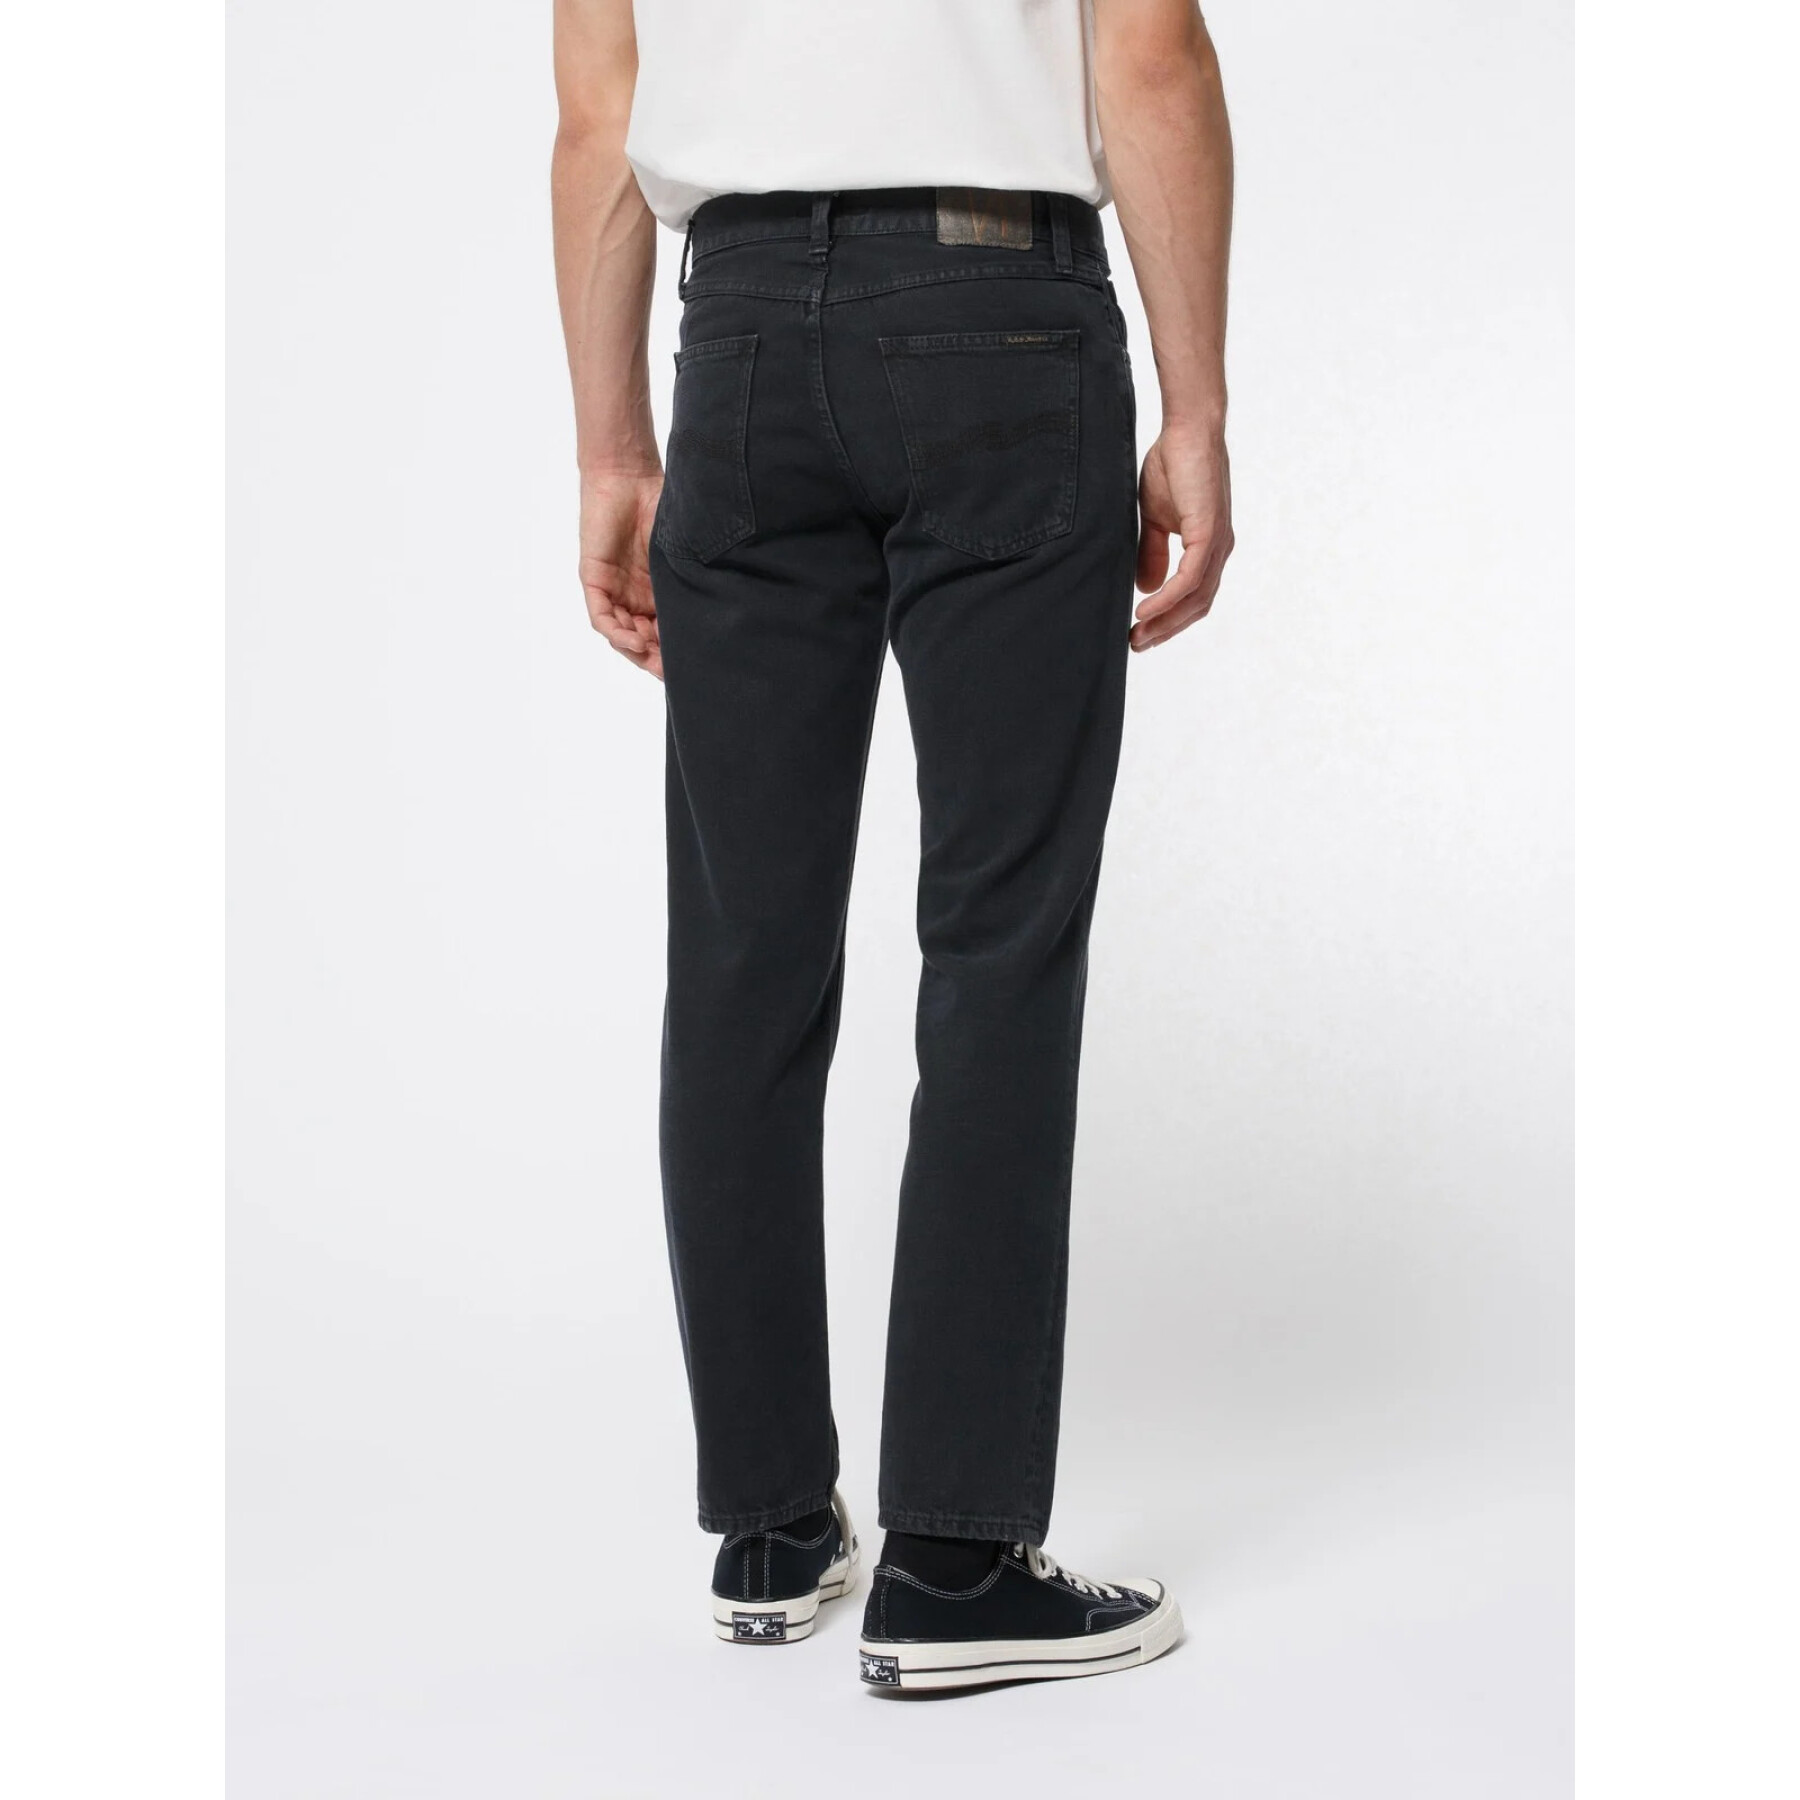 Jeans Nudie Jeans Gritty Jackson